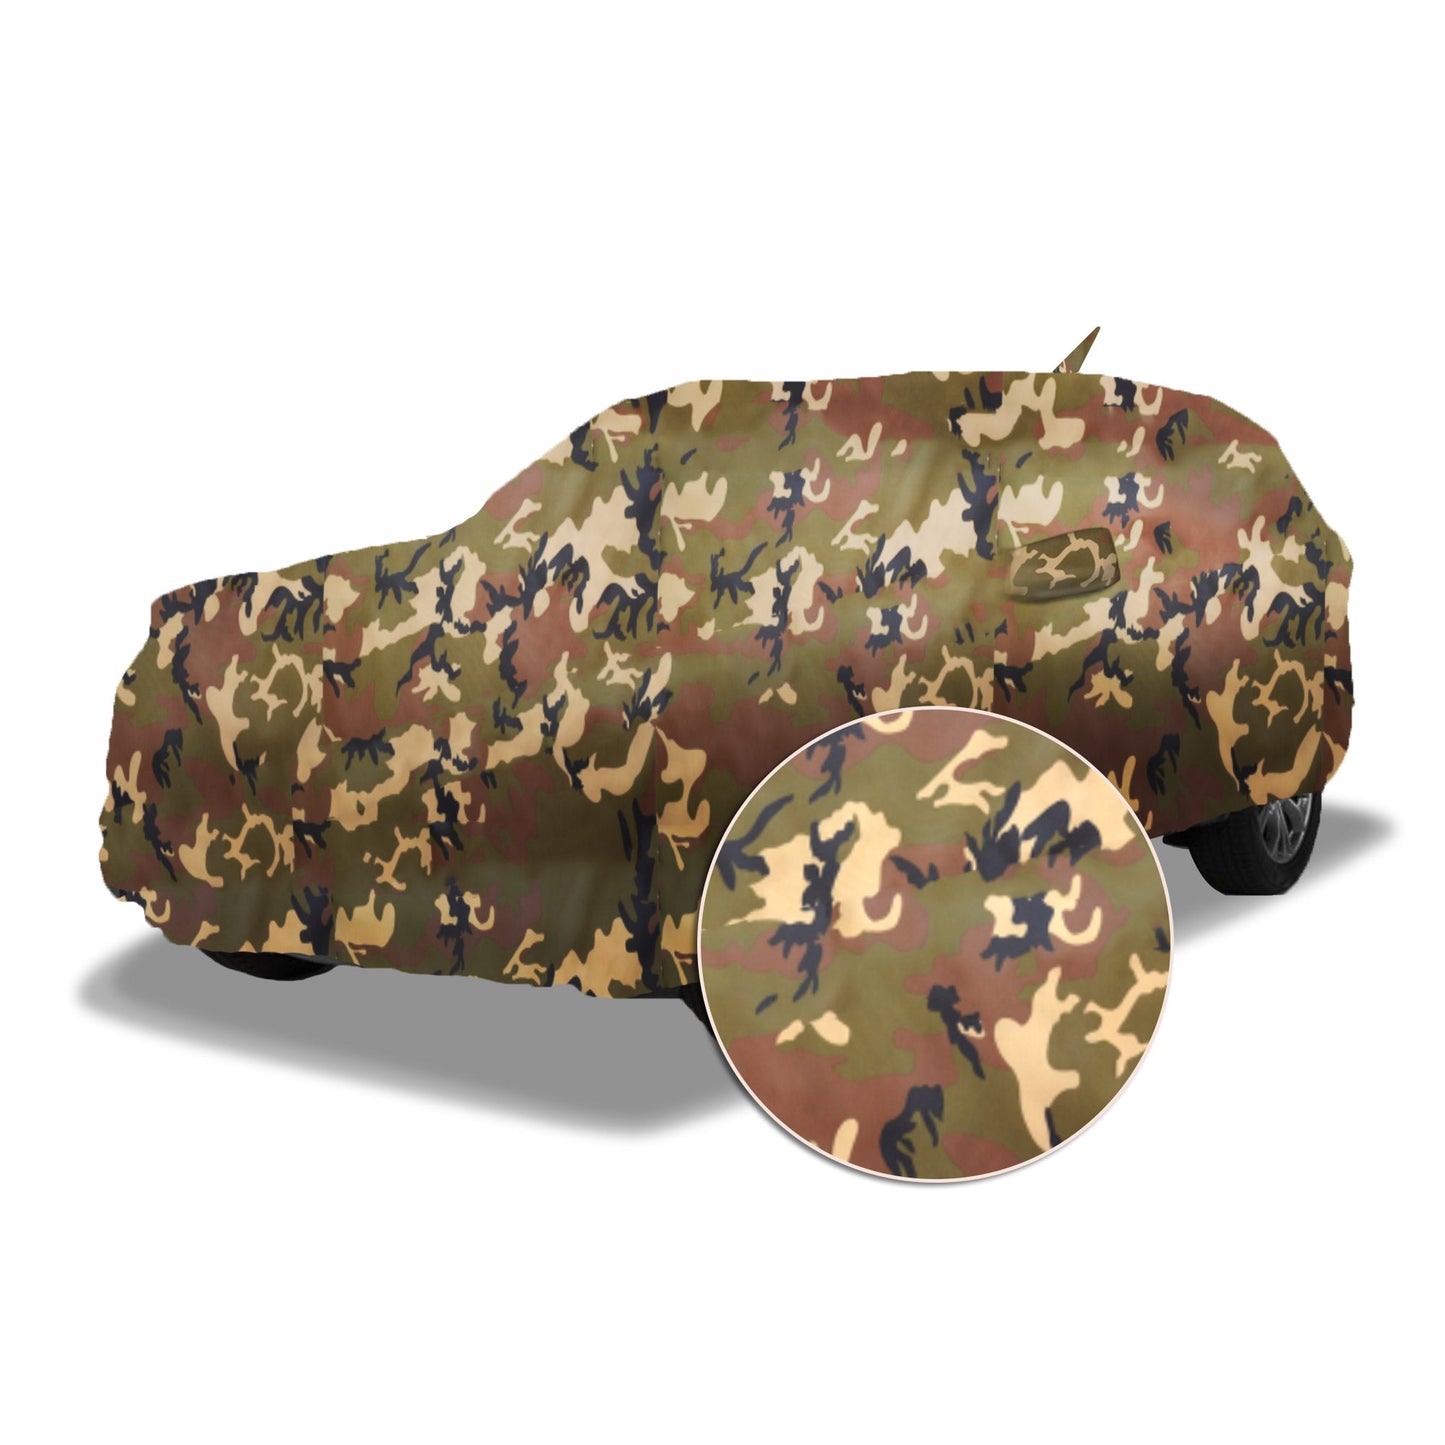 Ascot MG Hector Plus Car Body Cover Extra Strong & Dust Proof Jungle Military Car Cover with UV Proof & Water-Resistant Coating